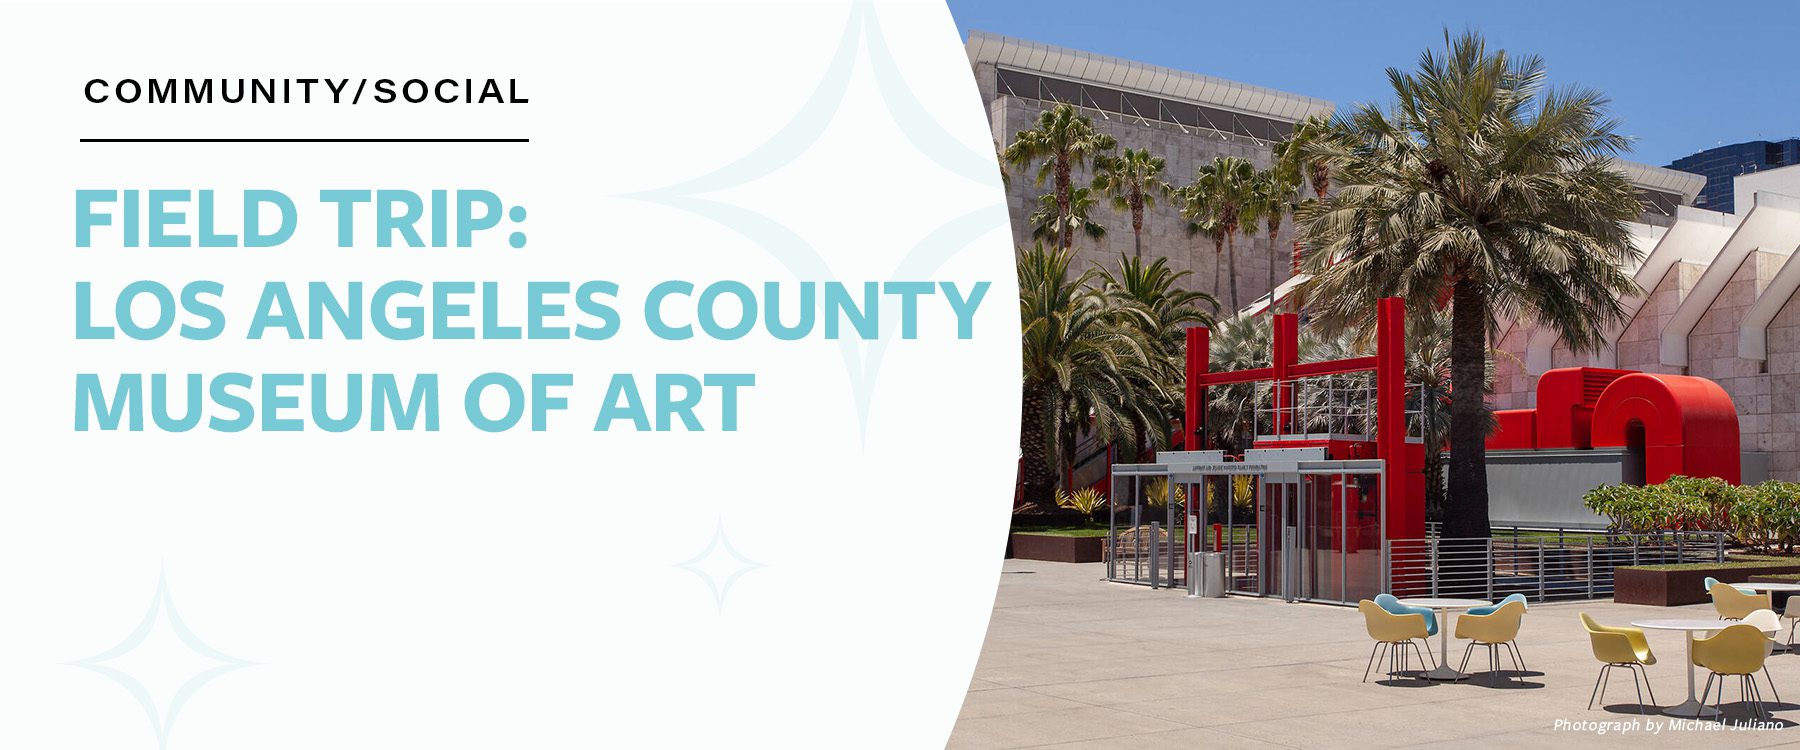 Field Trip to Los Angeles County Museum of Art